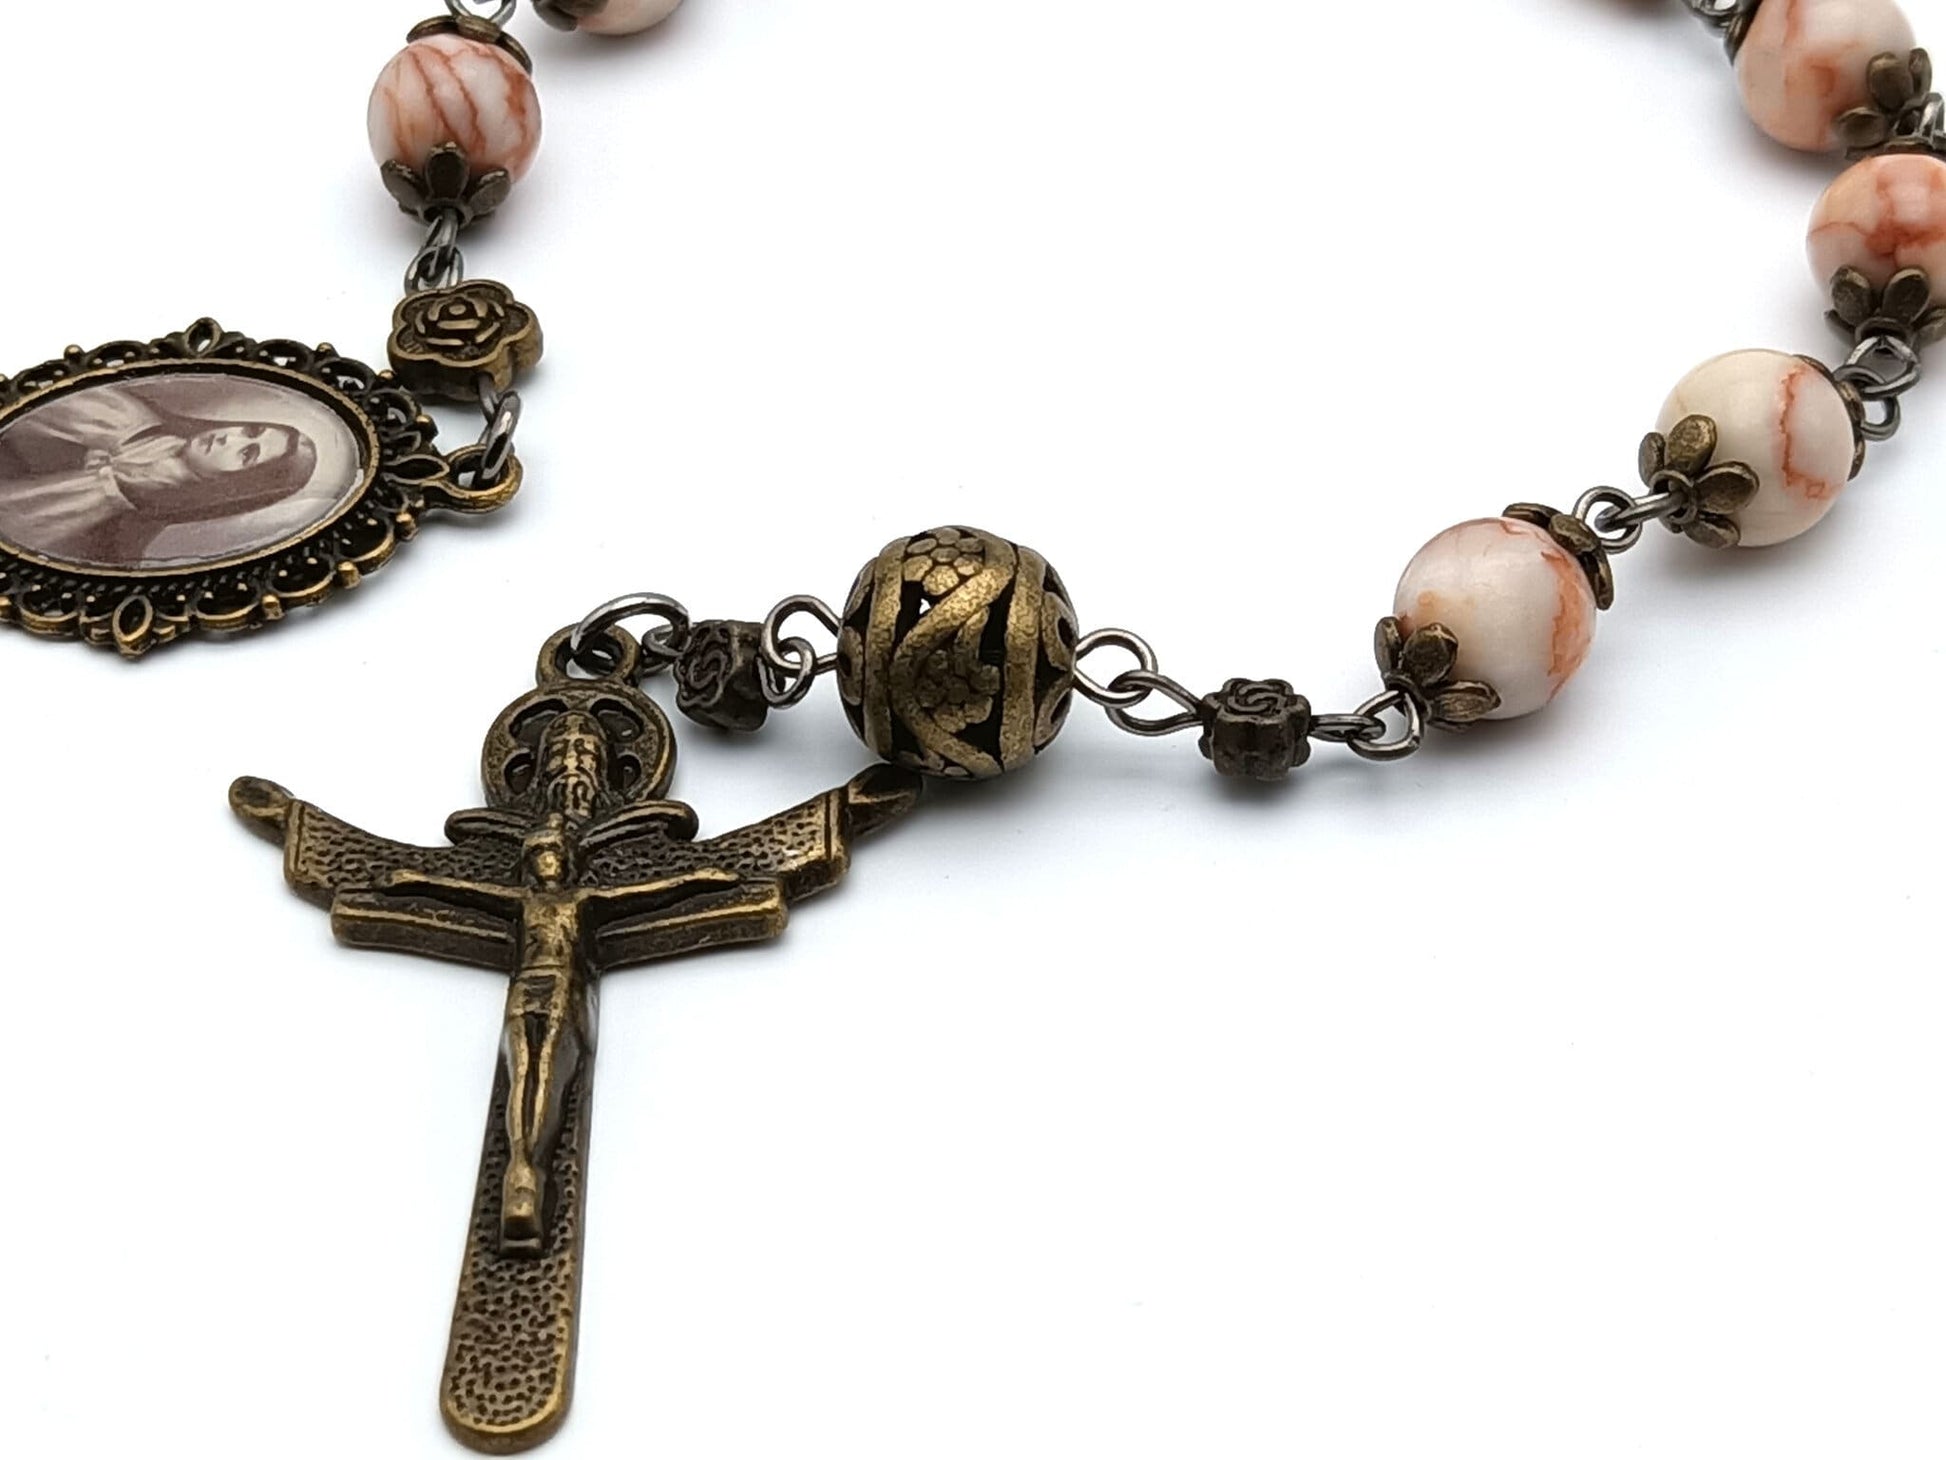 Saint Therese of Lisieux unique rosary beads single decade or tenner rosary with dragons blood gemstone beads, bronze bead caps, pater bead, Trinity crucifix and picture medal.